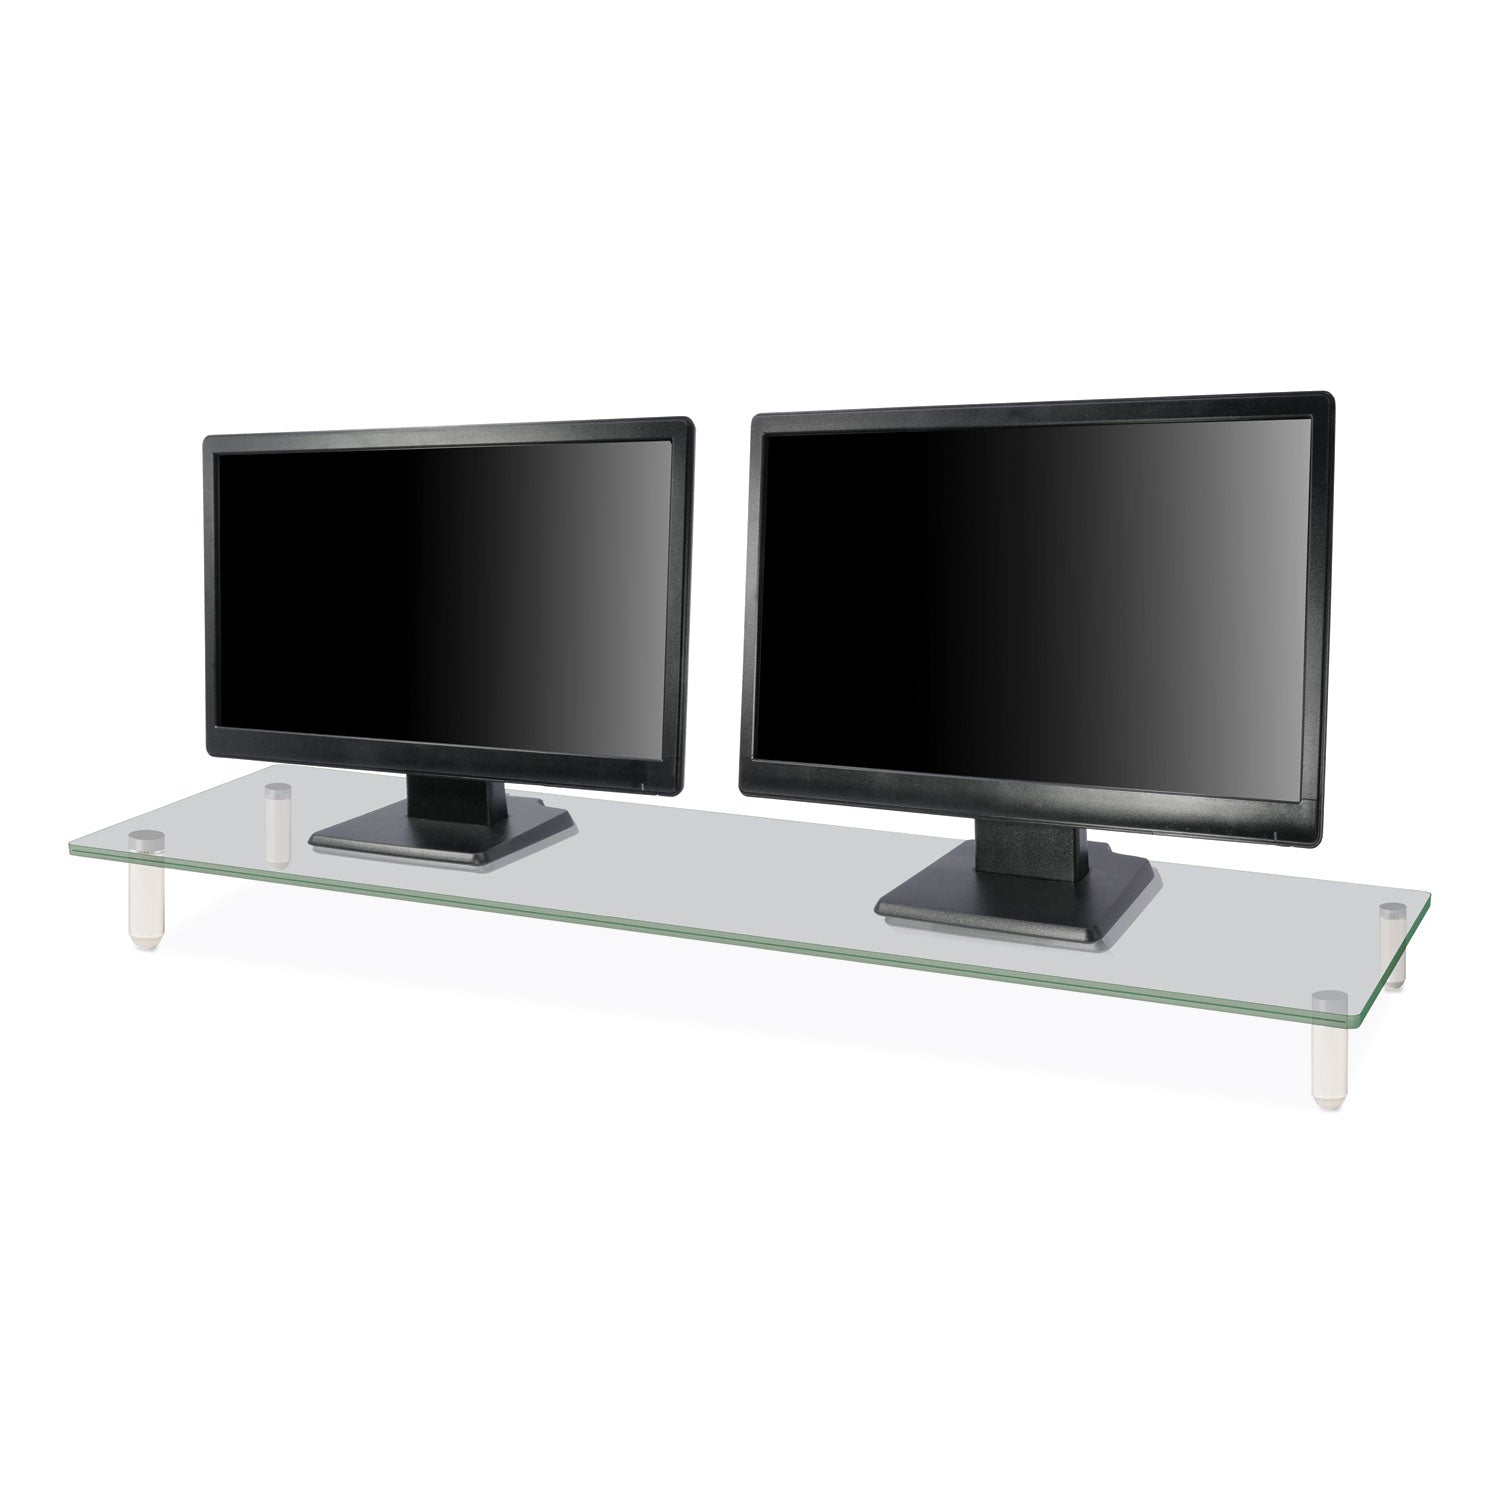 extra-wide-glass-monitor-riser-394-x-102-x-325-clear-supports-60-lbs_ktkms380 - 4